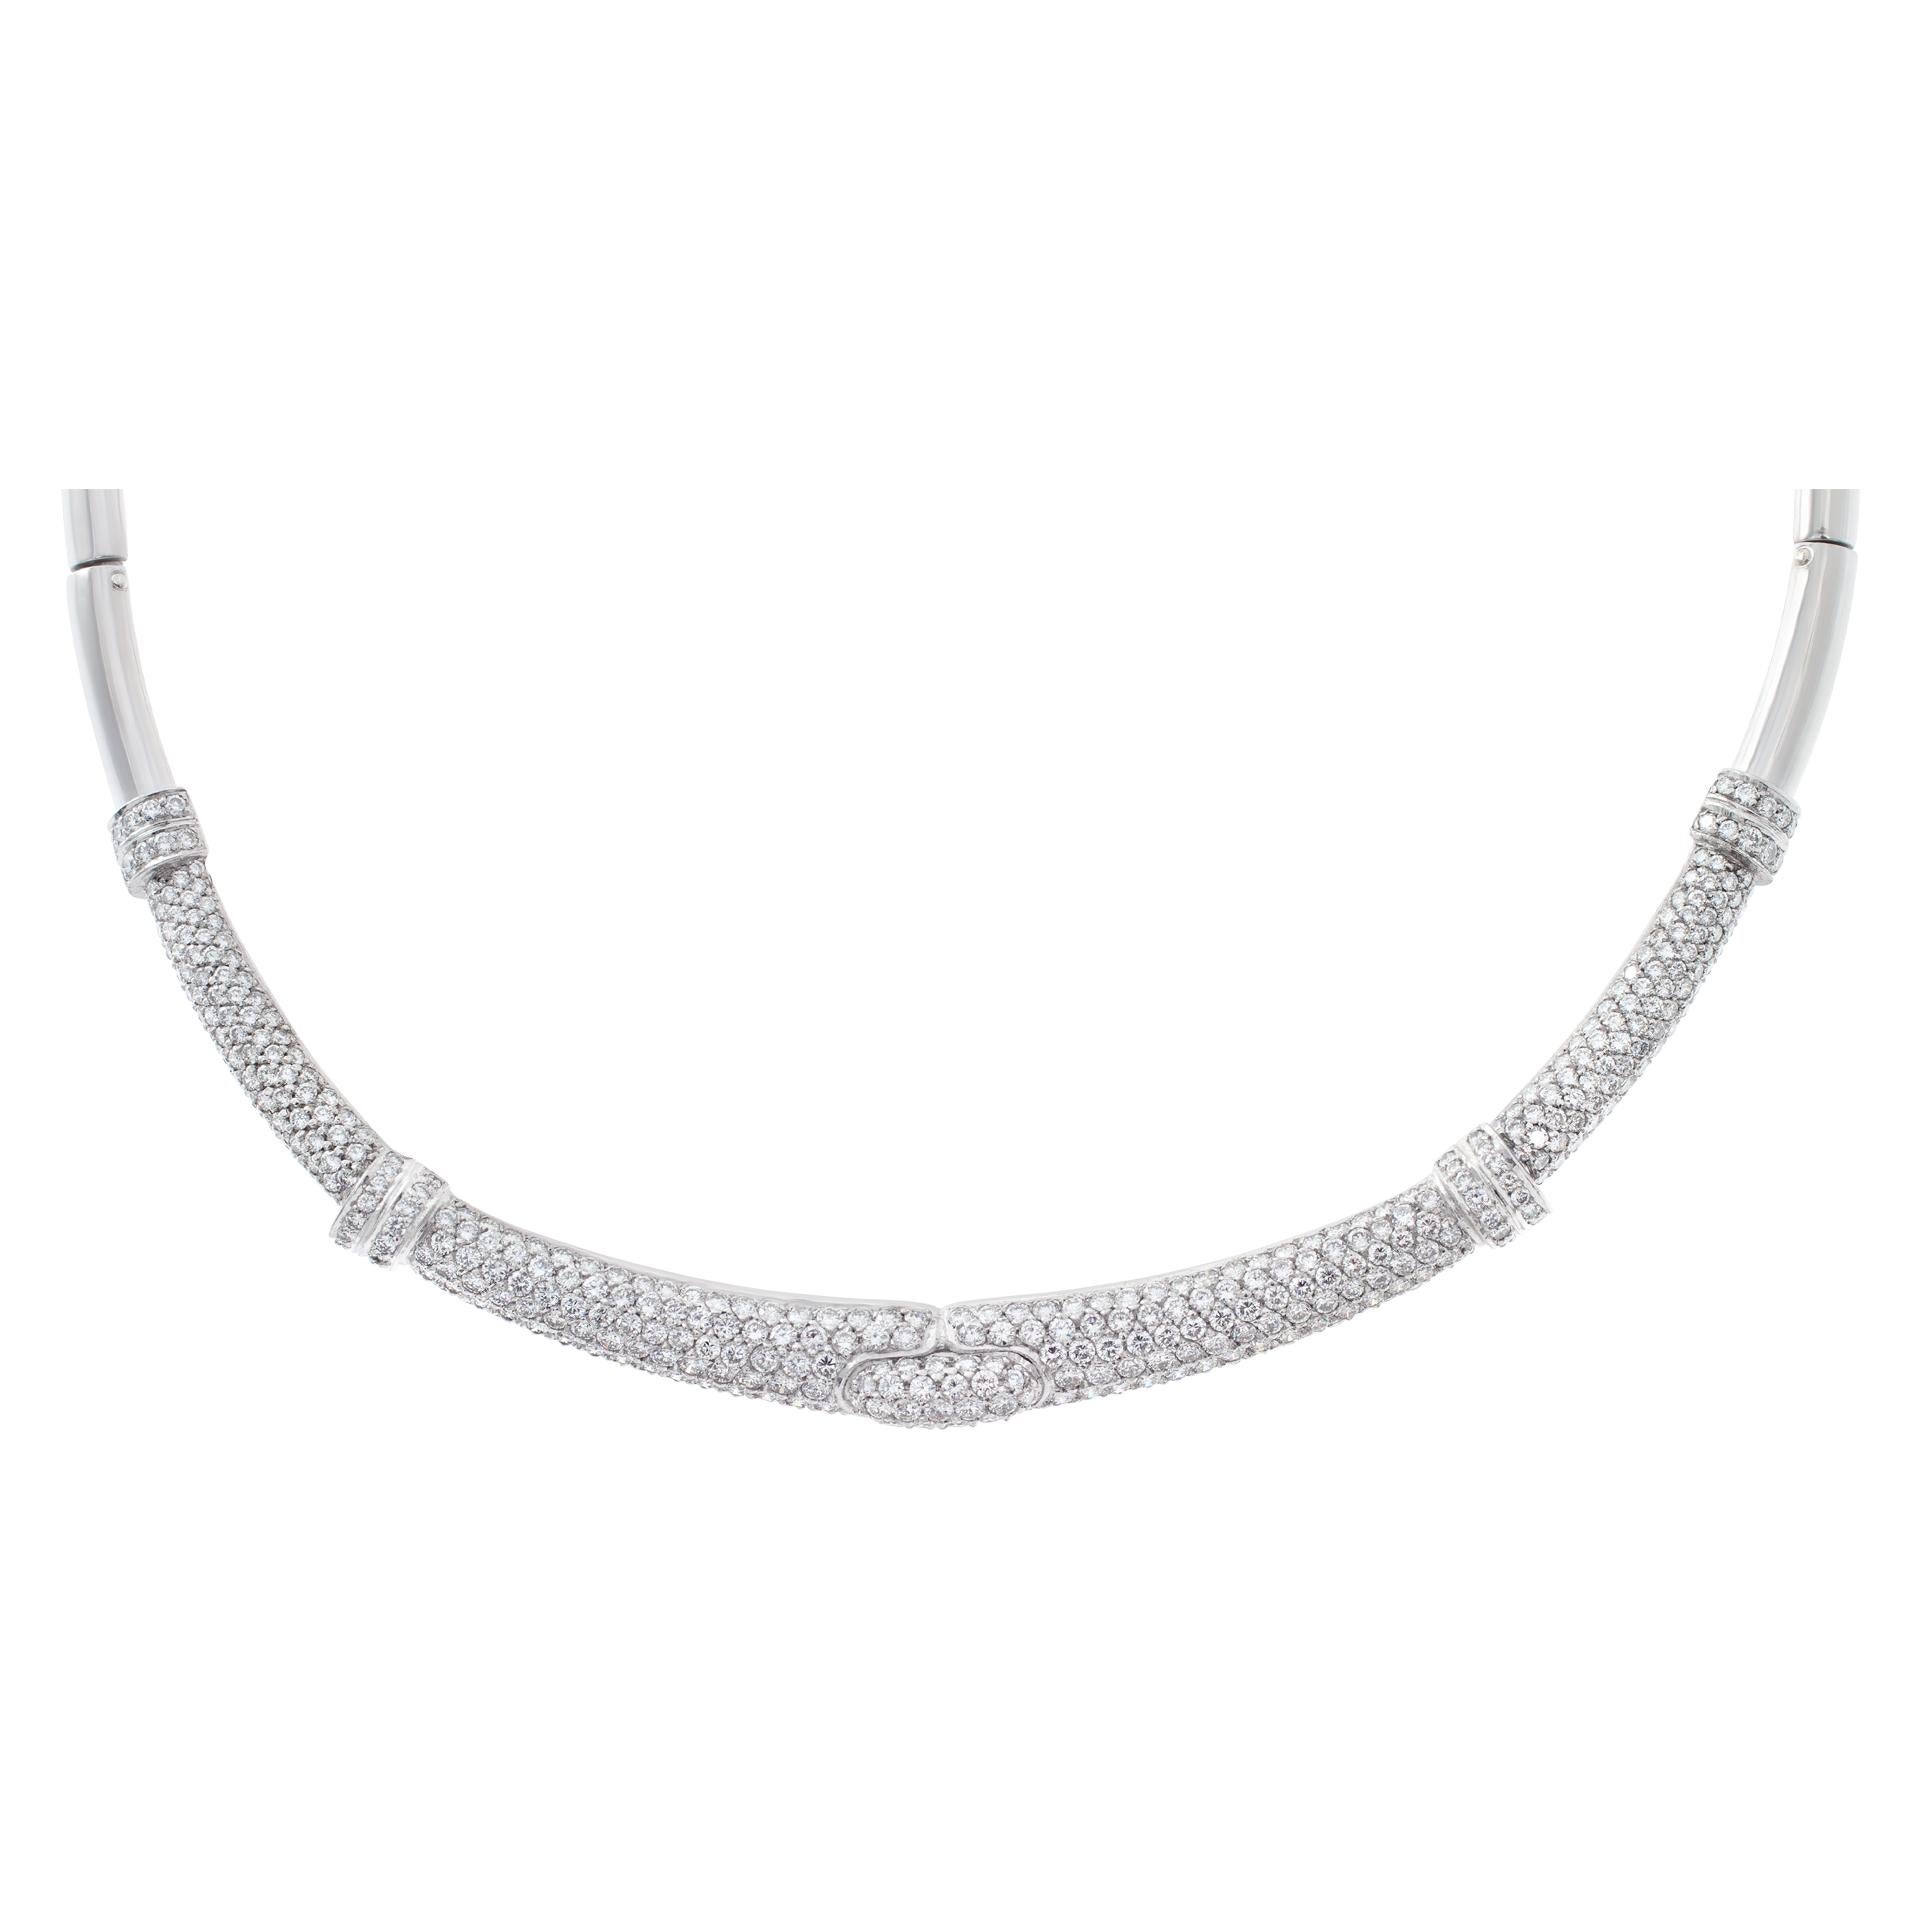 Fabulous diamond necklace in platinum In Excellent Condition For Sale In Surfside, FL